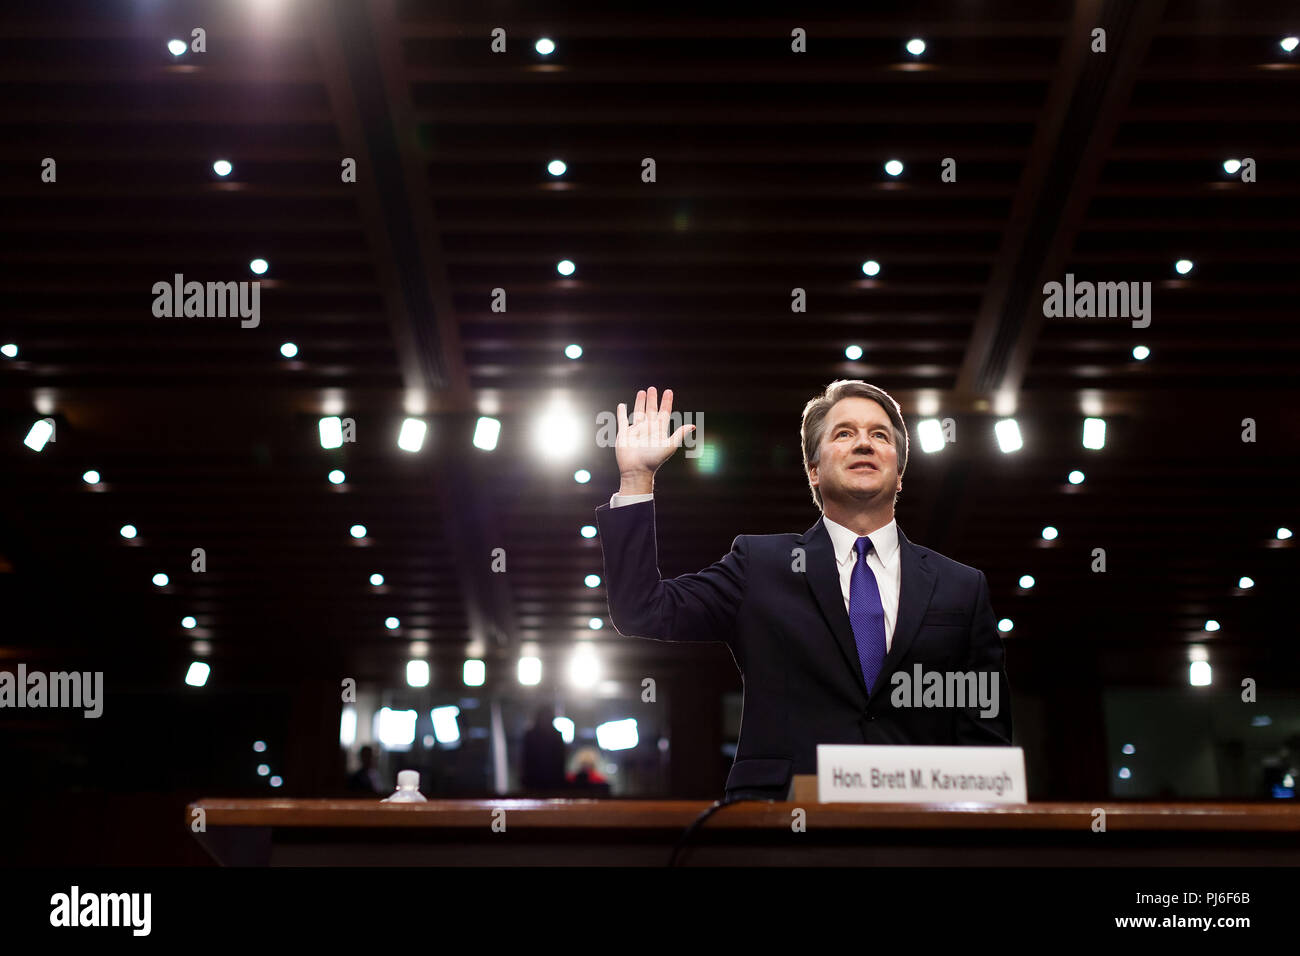 Washington, USA. 4th Sep, 2018. U.S. Supreme Court nominee Judge Brett Kavanaugh swears in during his Senate confirmation hearing on Capitol Hill in Washington, DC, the United States, Sept. 4, 2018. The Senate confirmation hearing for Kavanaugh began Tuesday, which has descended into chaos as Democrats protested about Republicans blocking access to documents concerning the judge. Credit: Ting Shen/Xinhua/Alamy Live News Stock Photo